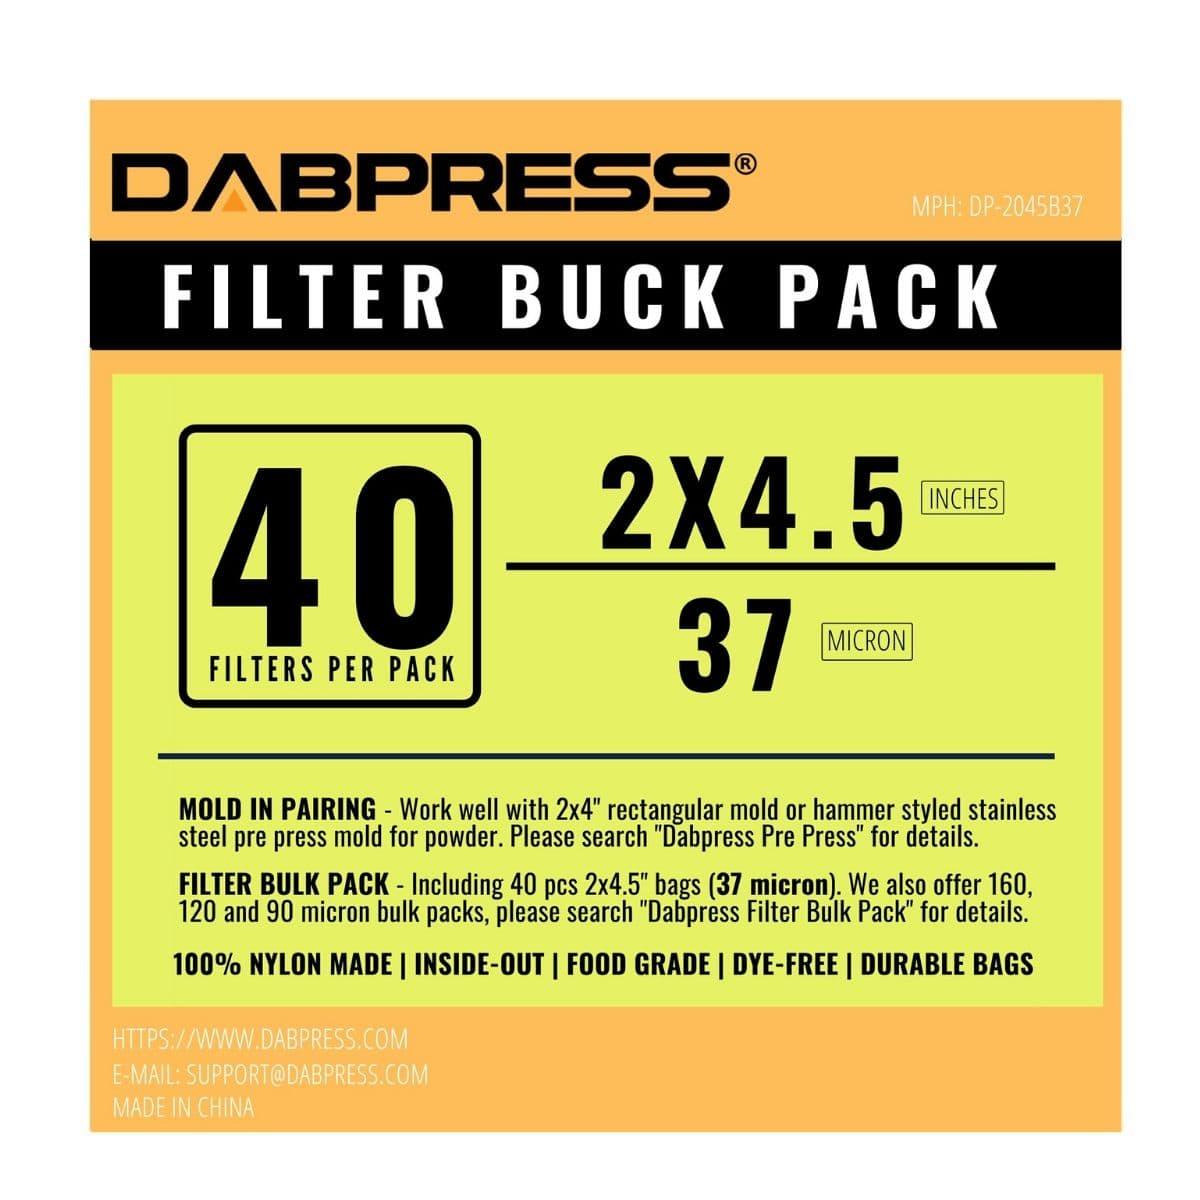 Dabpress Rosin Press Bags - 2x4 Nylon Screen Mesh Bags from 37,90,120 and 160 Micron for Extraction - ROSITEK